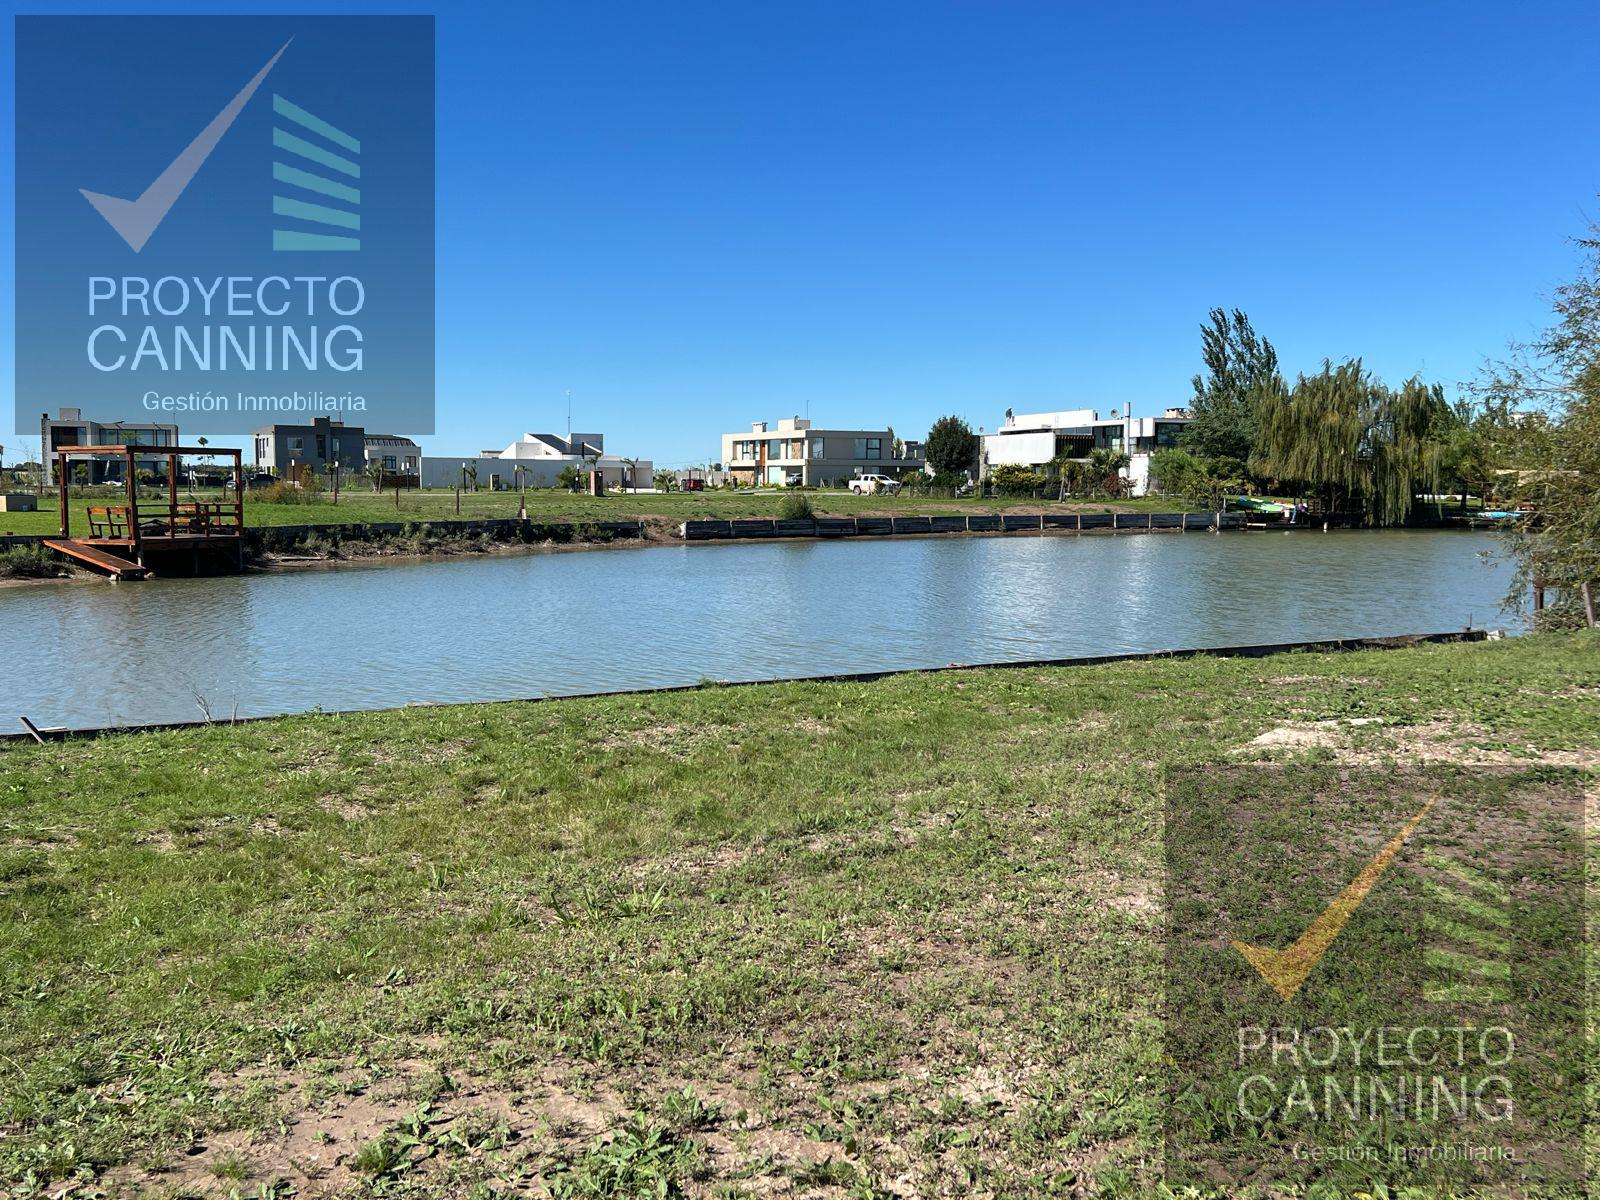 #5047918 | Venta | Lote | Canning (Proyecto Canning)